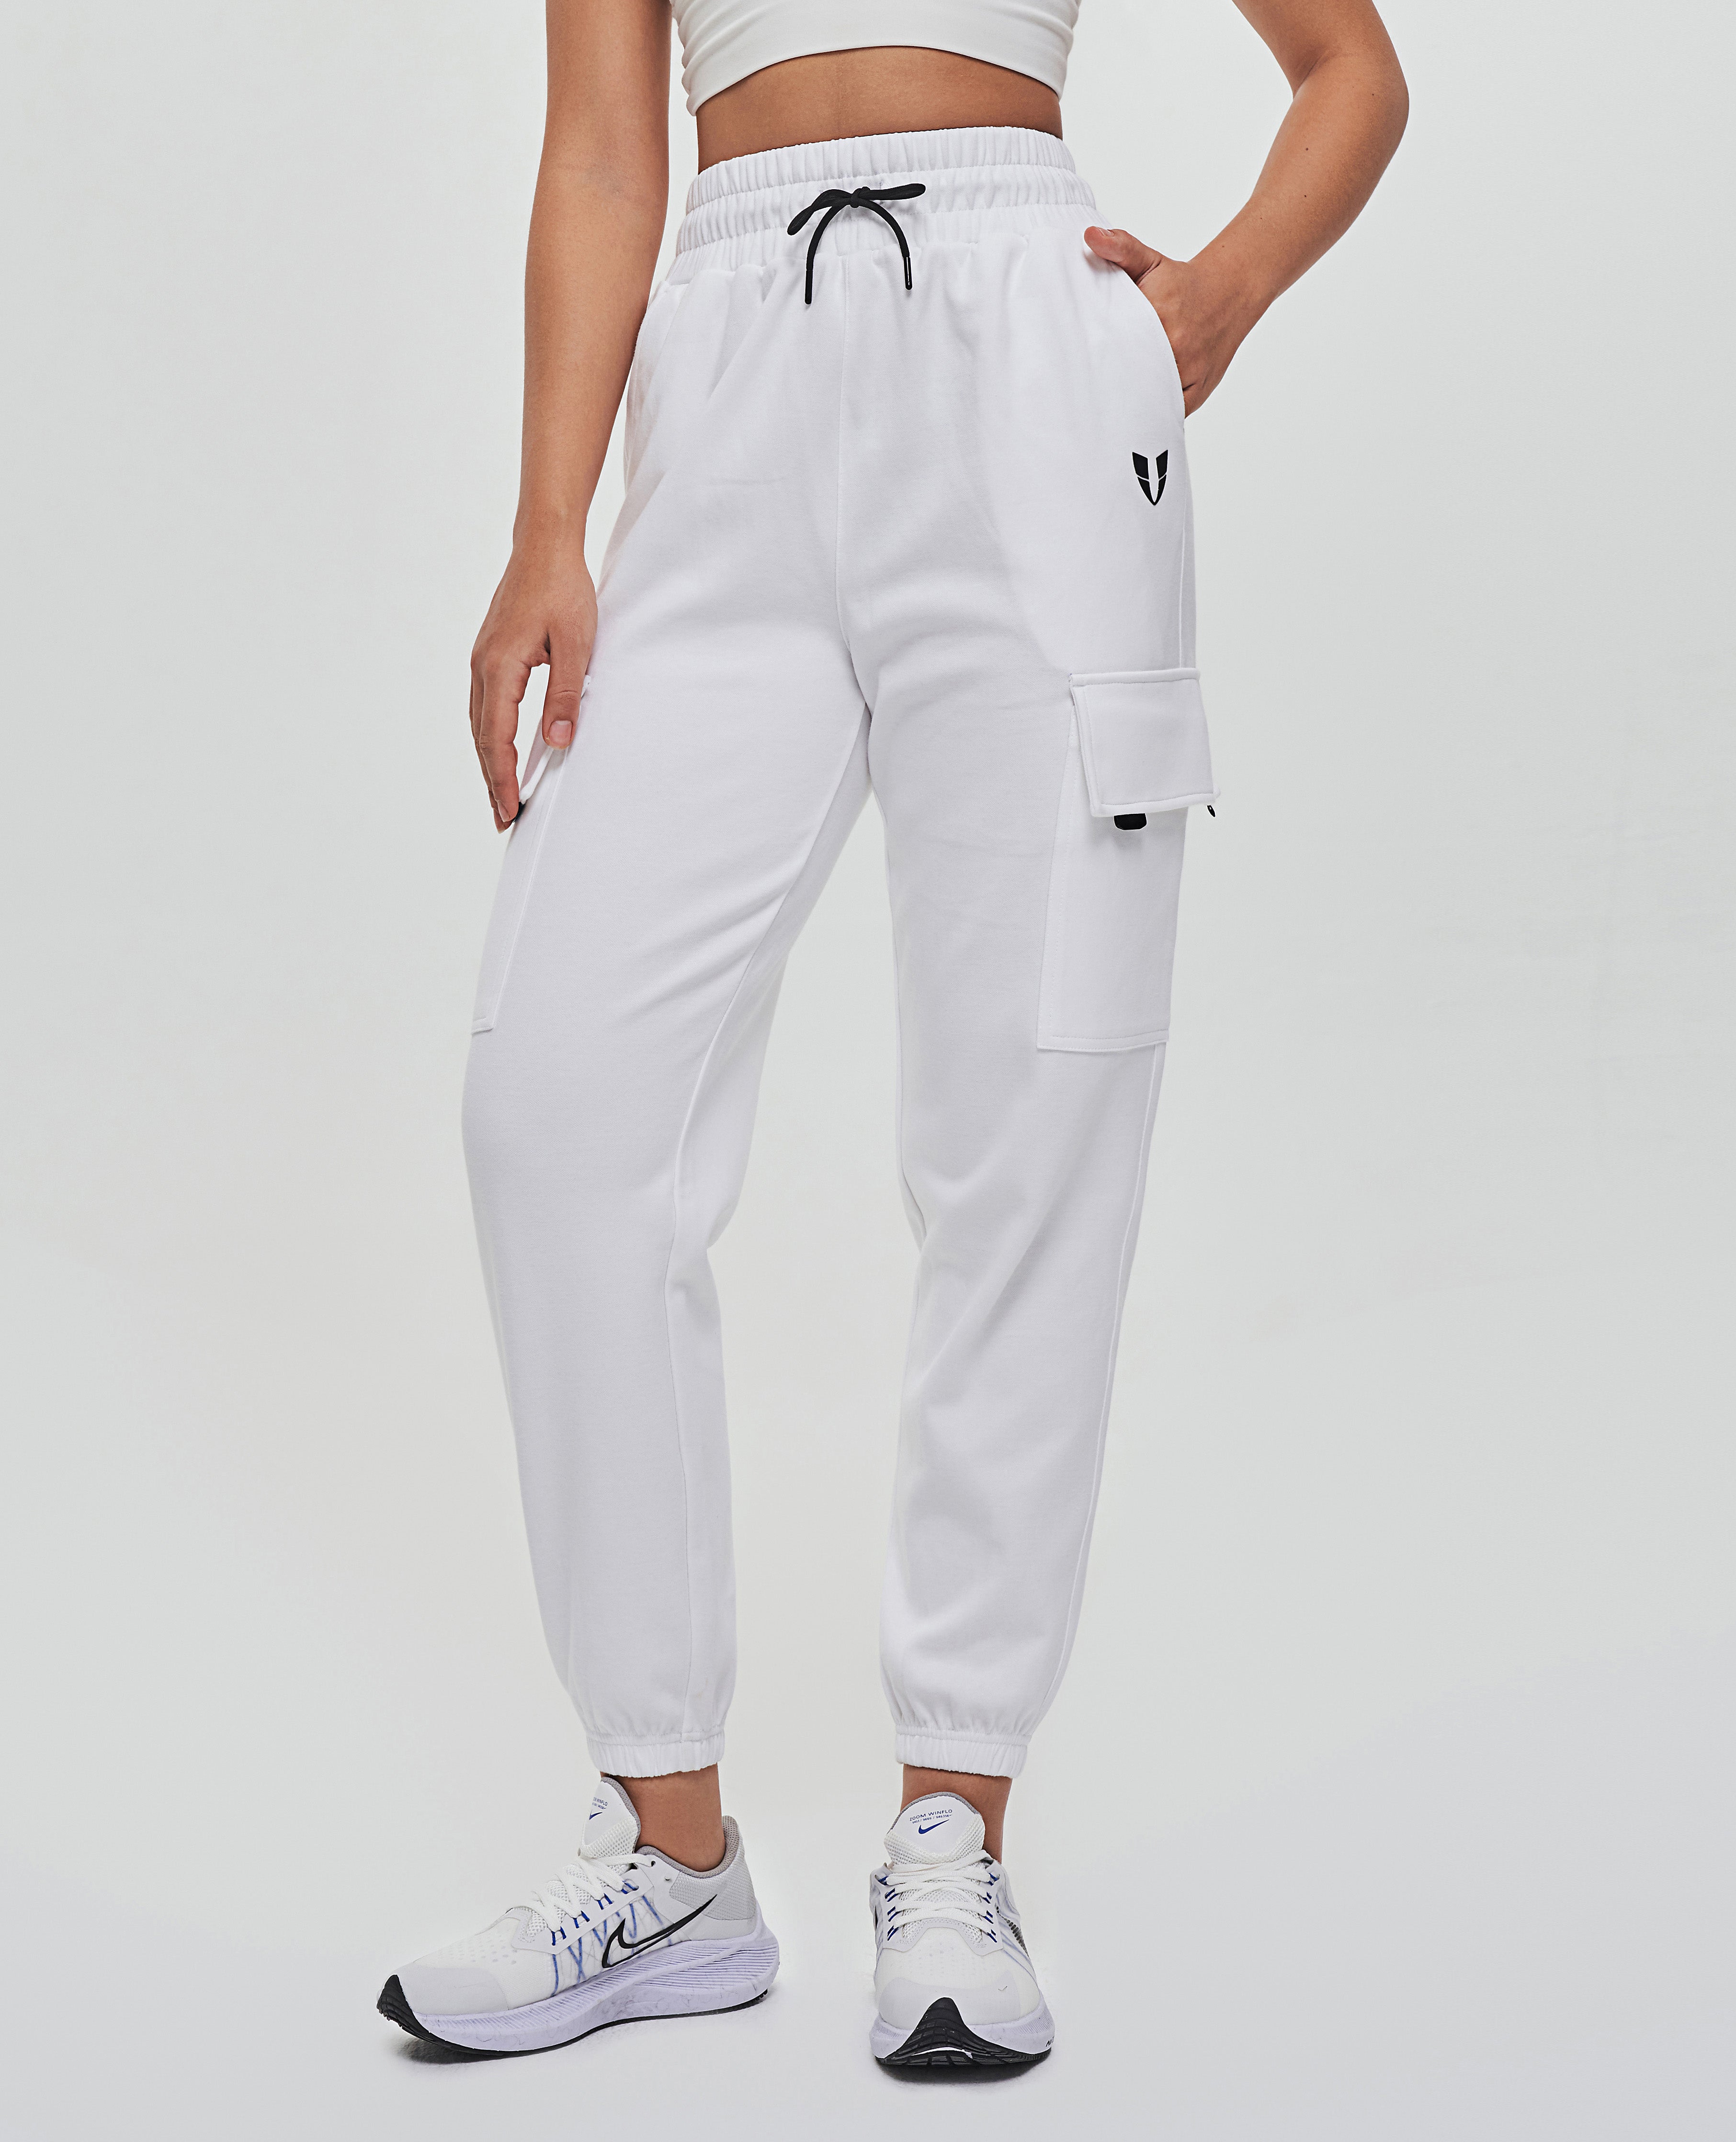 Wide Leg Sweatpants for Women | Cargo Joggers | FIRM ABS